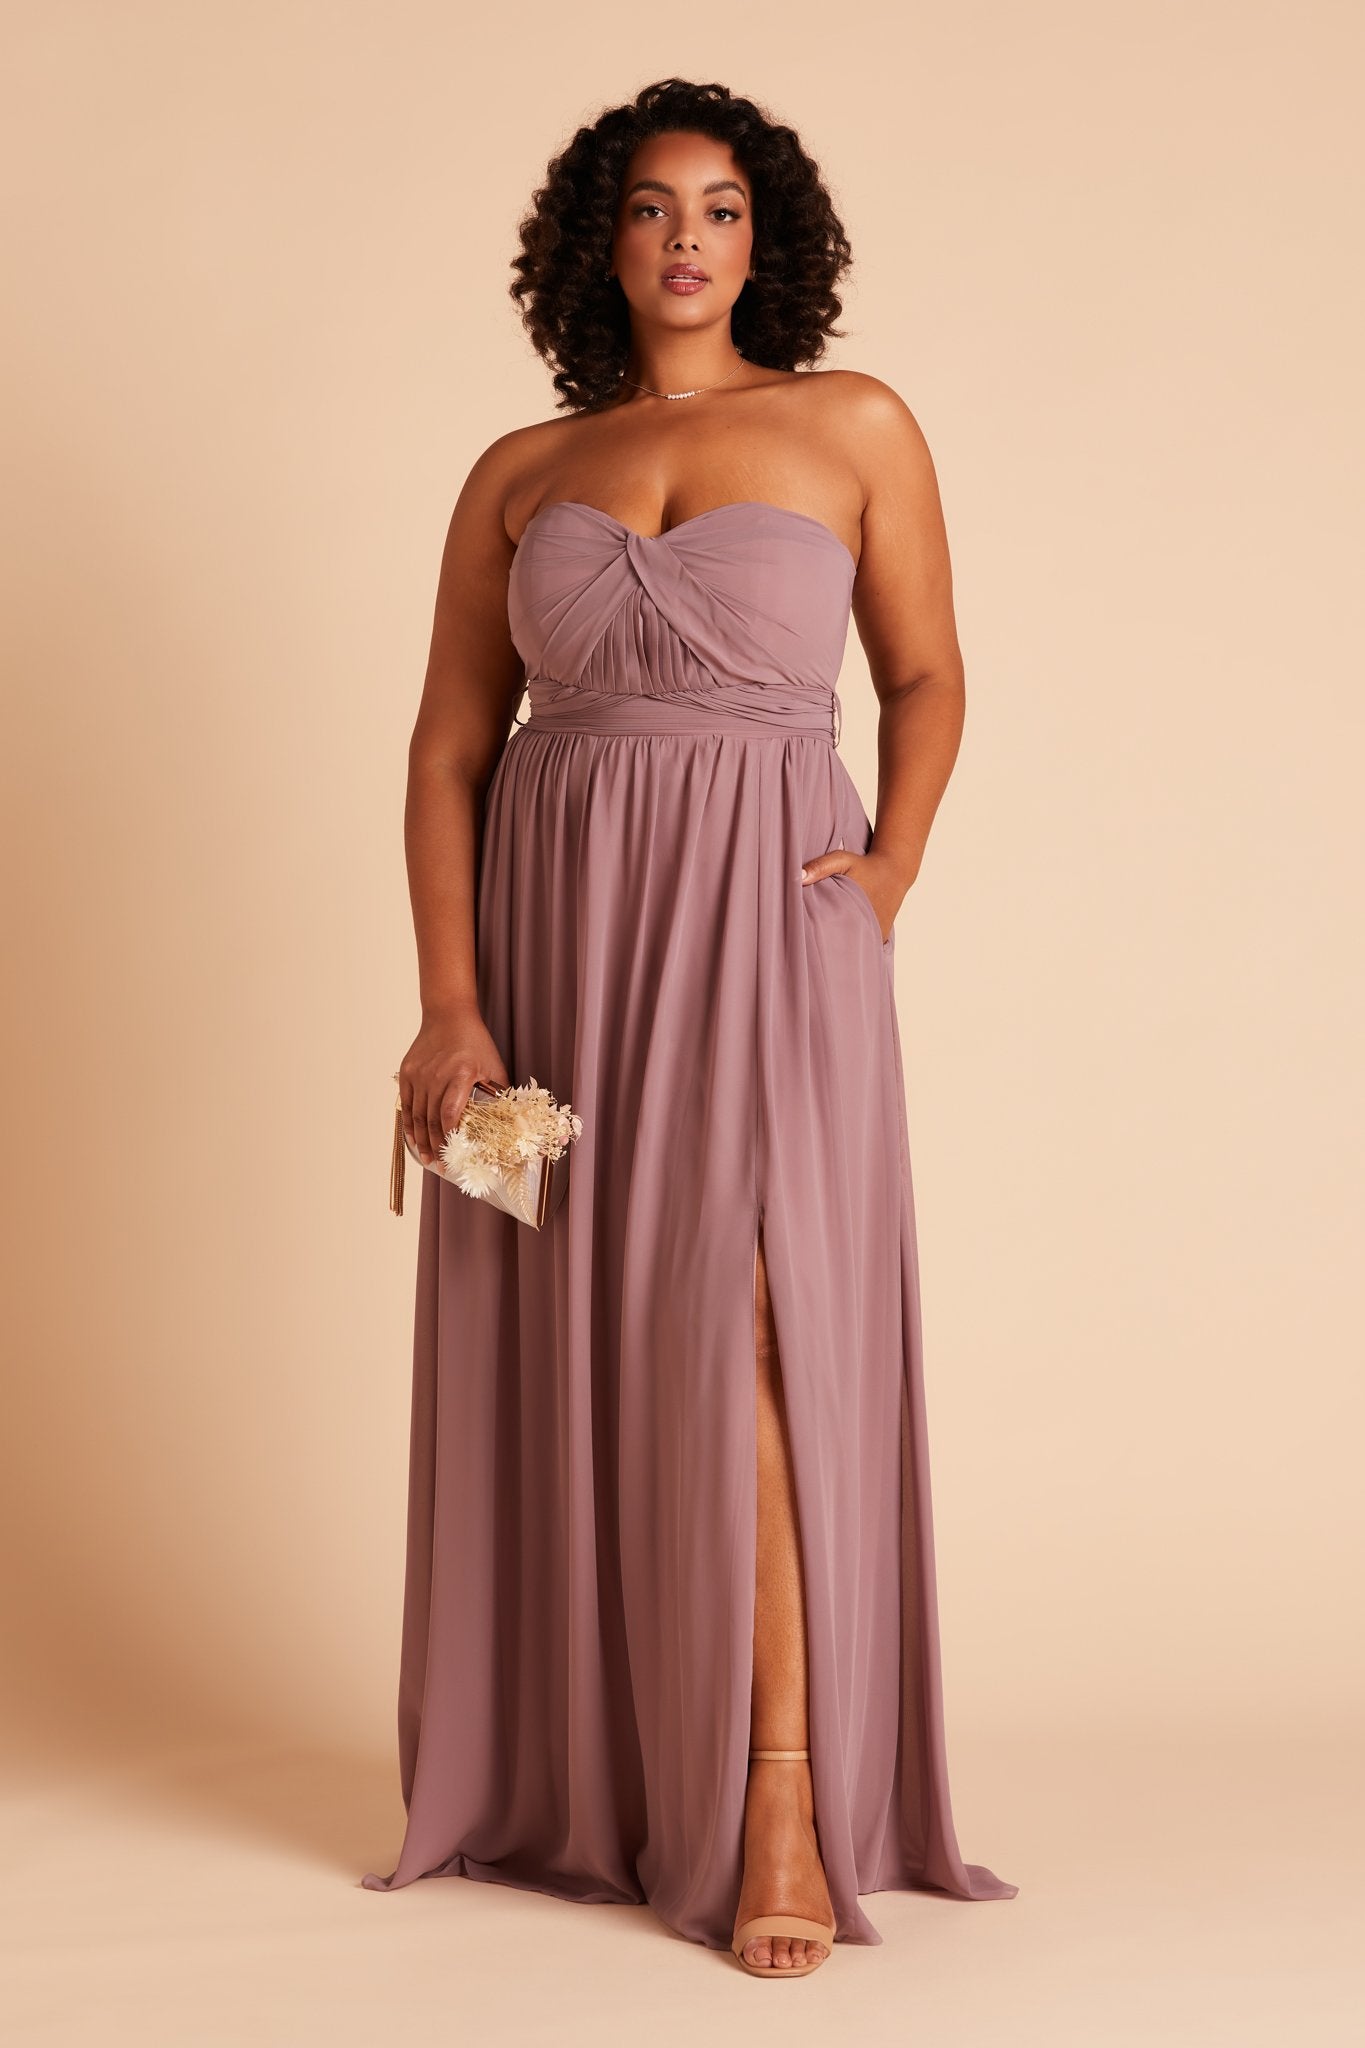 Grace convertible plus size bridesmaid dress with slit in dark mauve chiffon by Birdy Grey, front view with hand in pocket